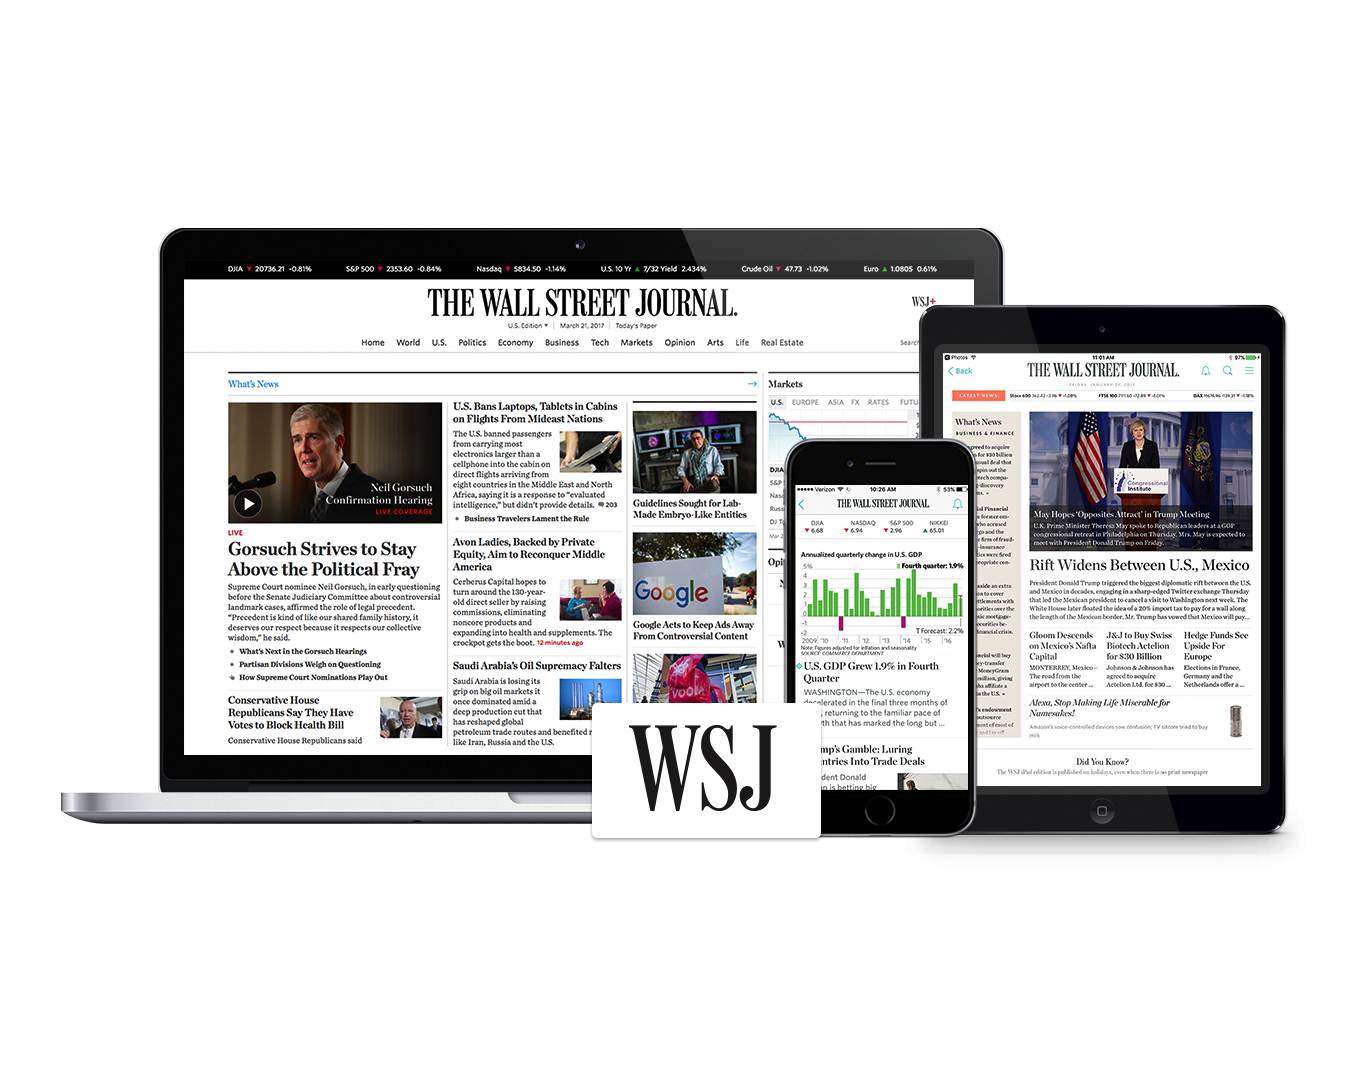 What Are The Benefits Of Subscribing Online To The Wall Street Journal